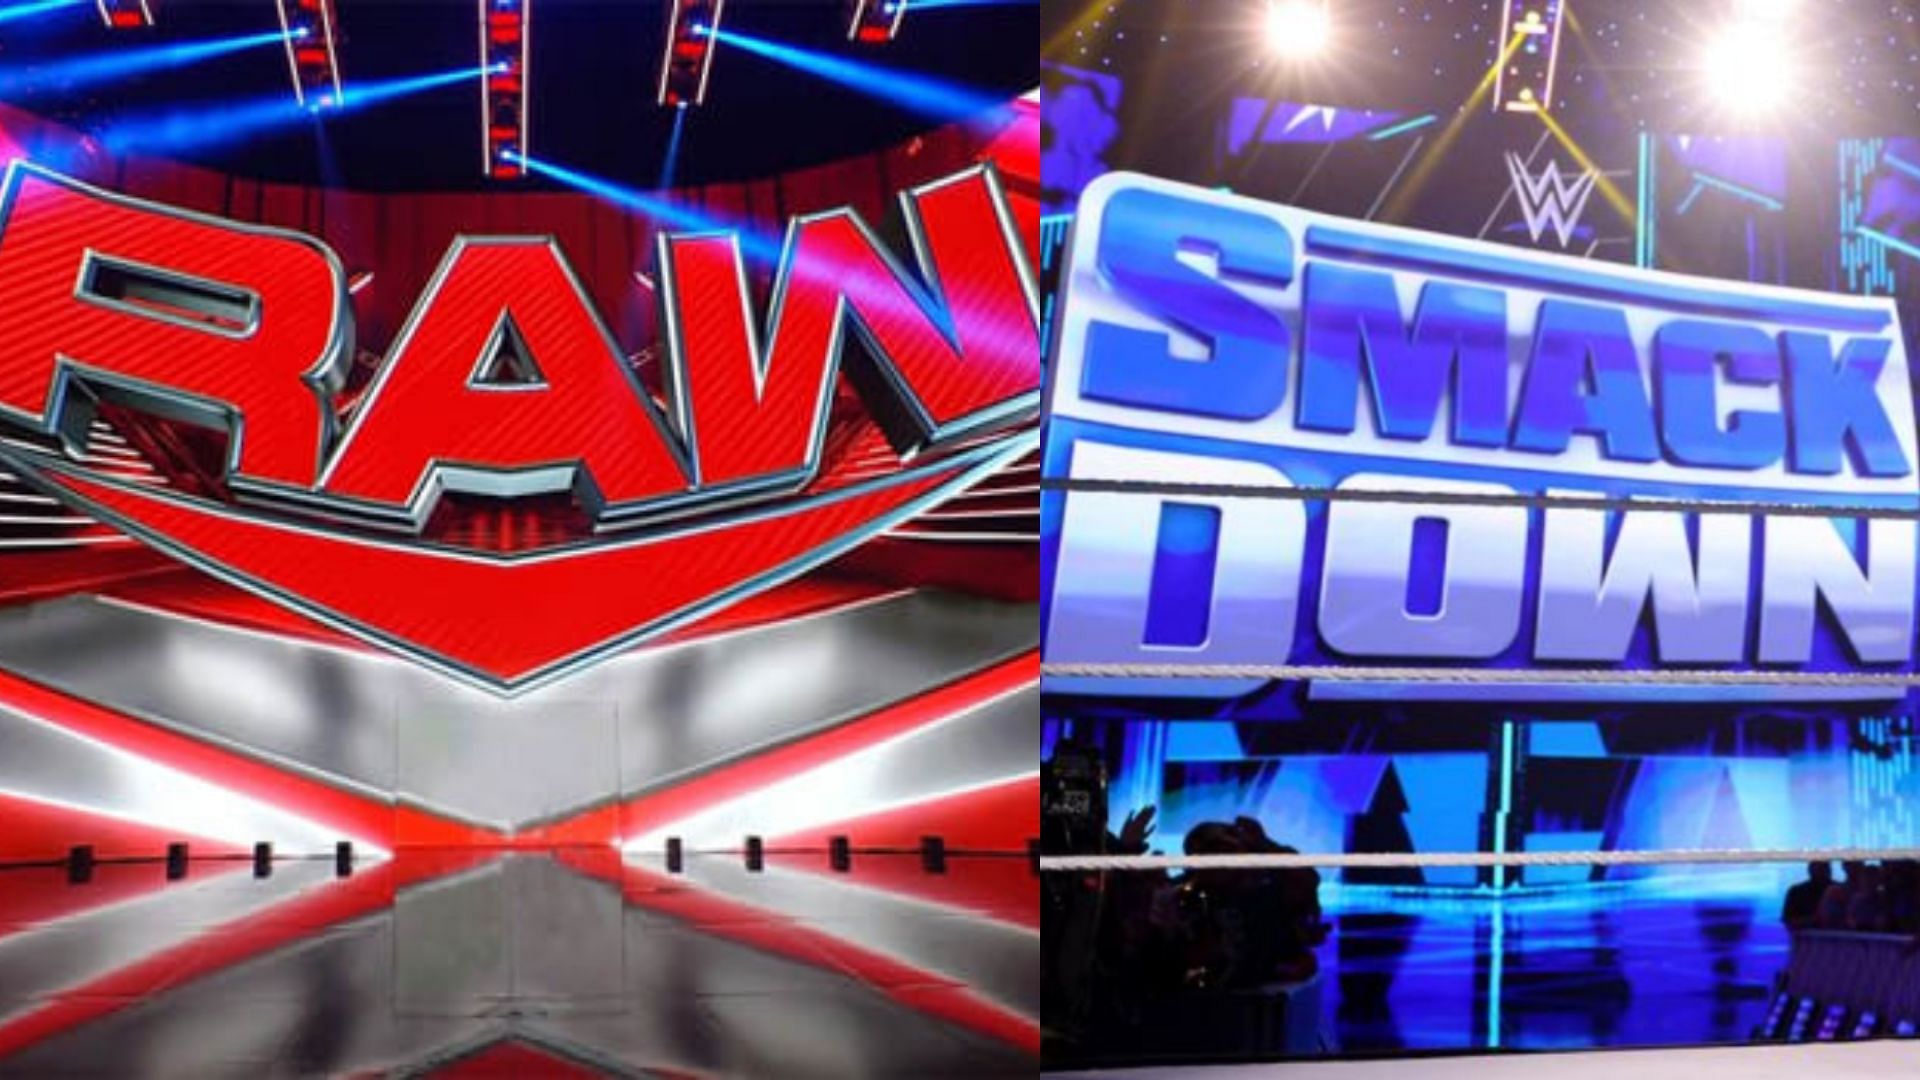 WWE Raw (left); WWE Smackdown (right)